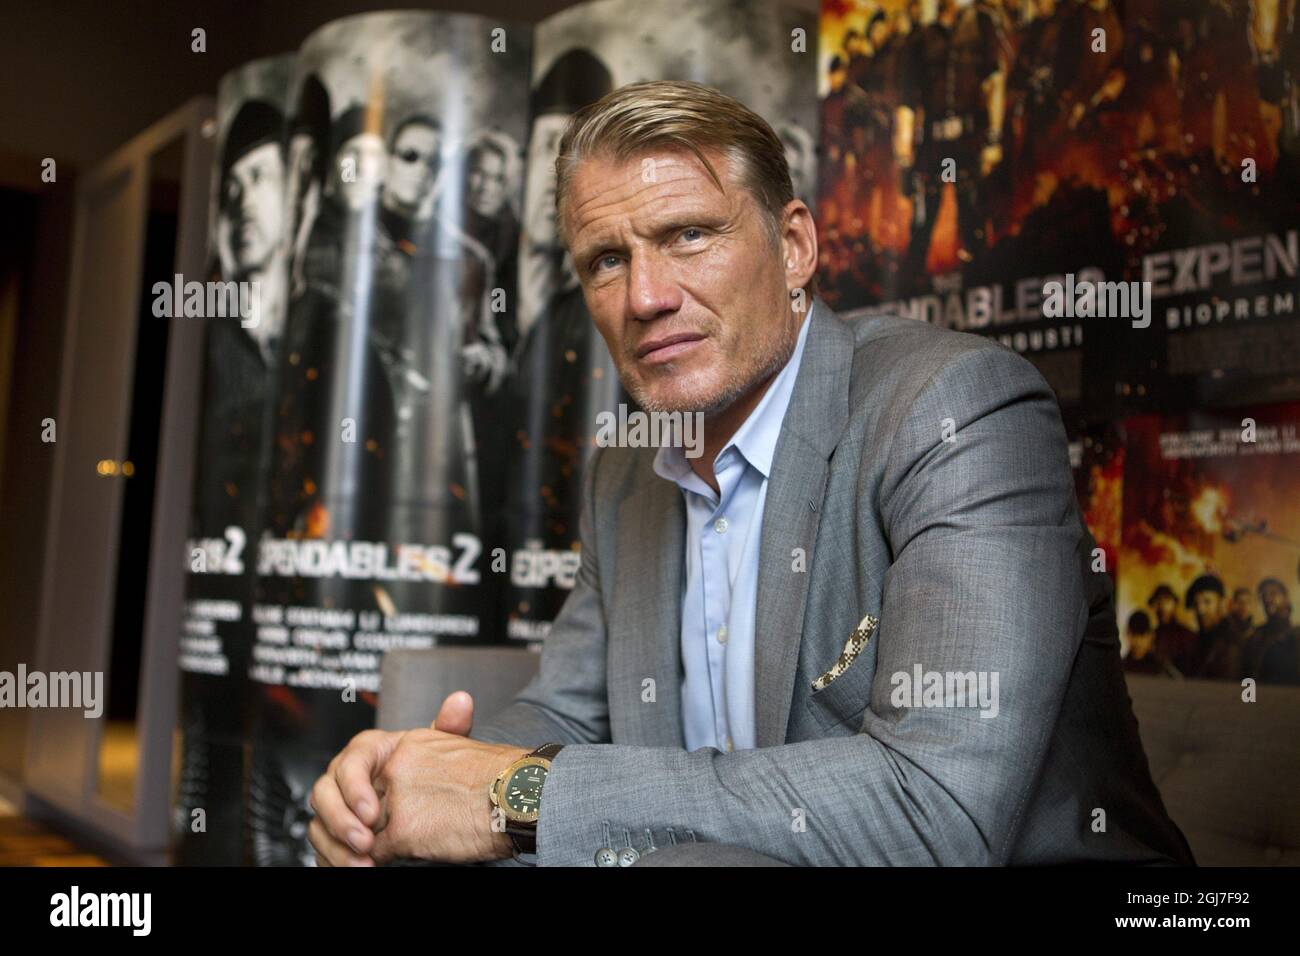 STOCKHOLM 20120821 Swedish actor Dolph Lundgren is seen posing for the photographer in Stockholm, Sweden, August 21, 2013. Dolph Lundgren is sin Sweden to promote his new movieÂ”Expendables 2Â”. Foto: Ylwa Yngvesson / XP / SCANPIX / kod 8517 ** OUT SWEDEN OUT ** Stock Photo